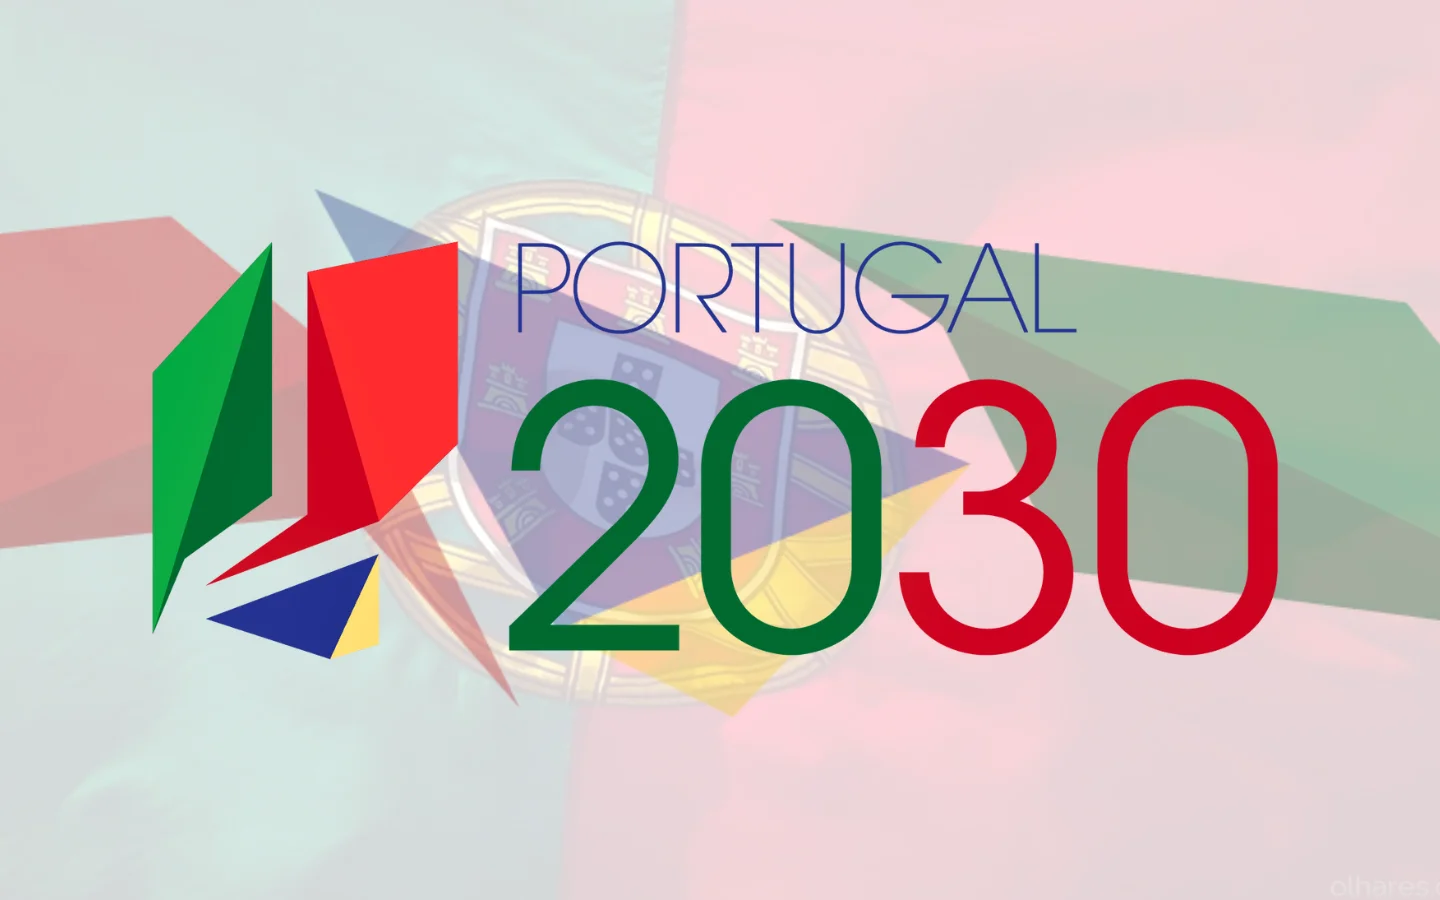 PORTUGAL 2030 Consulting Summit